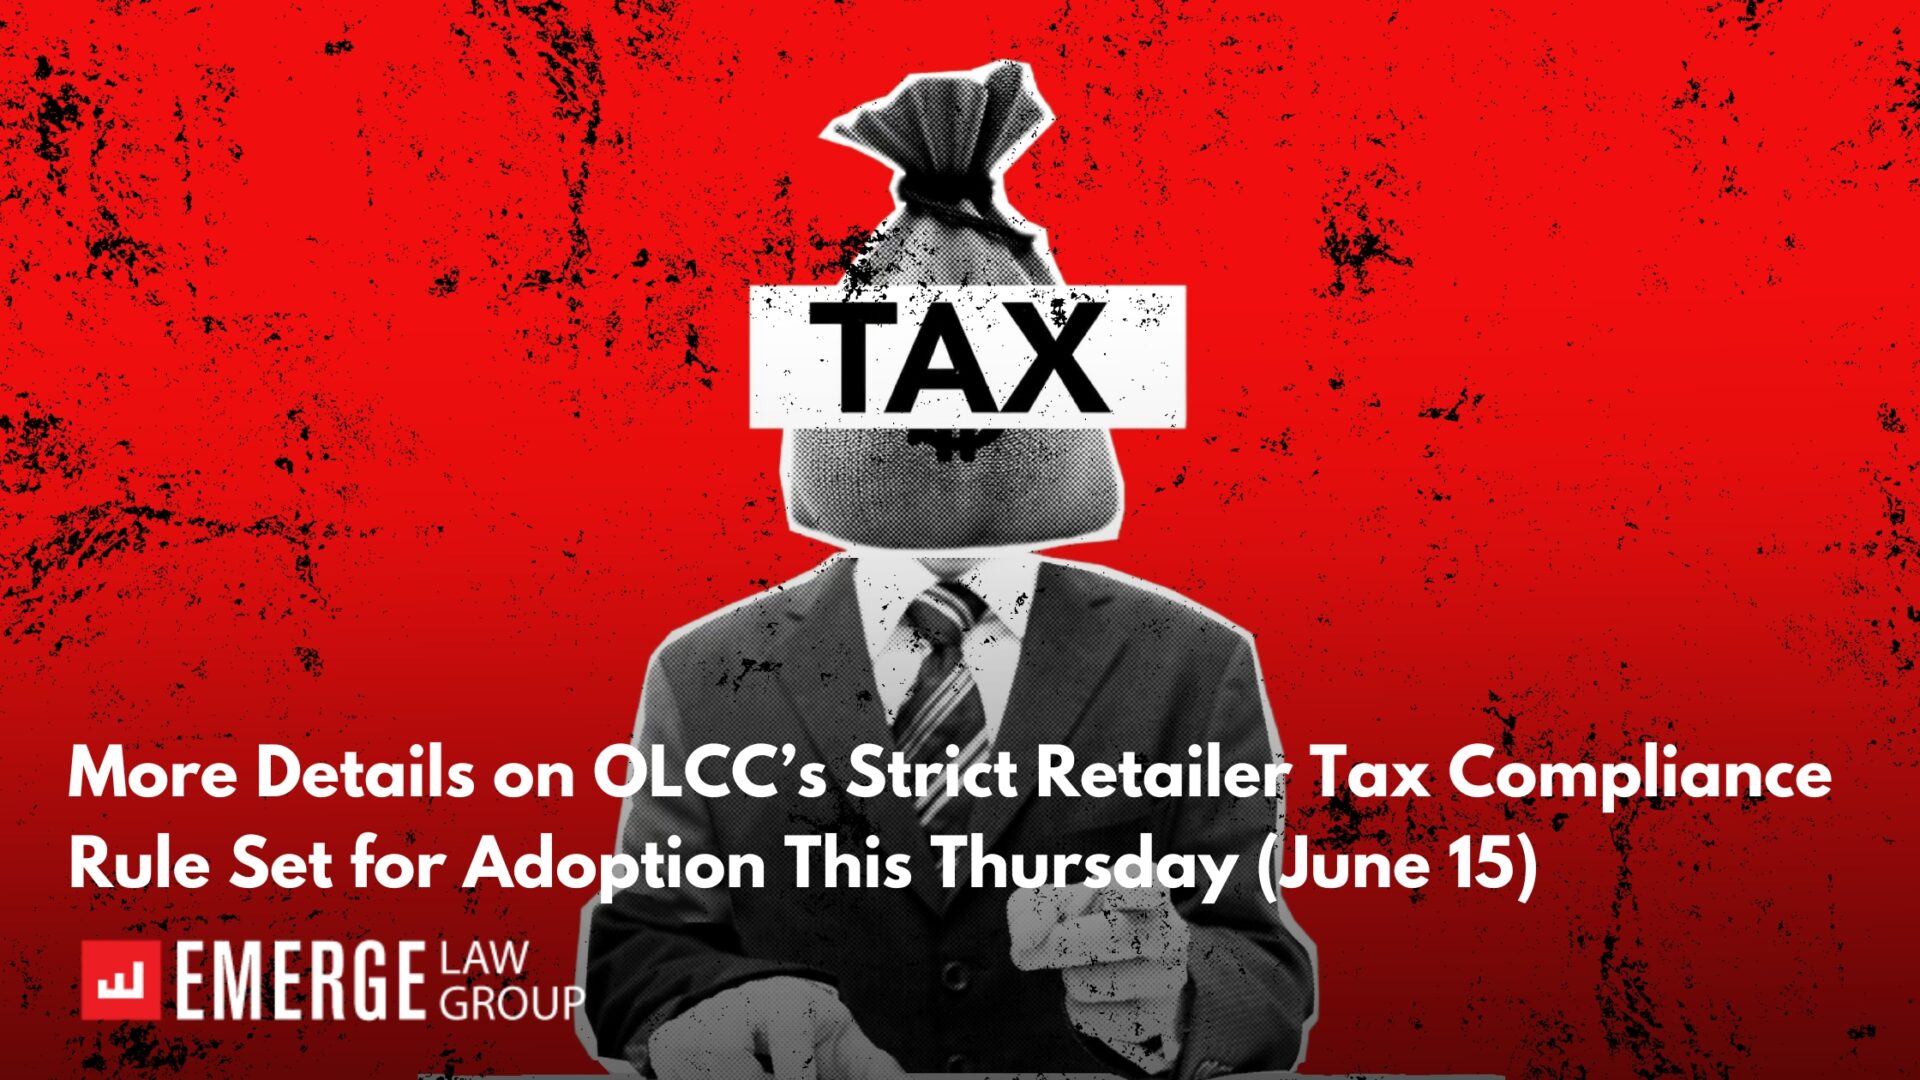 More Details on OLCC’s Strict Retailer Tax Compliance Rule Set for Adoption This Thursday (June 15)